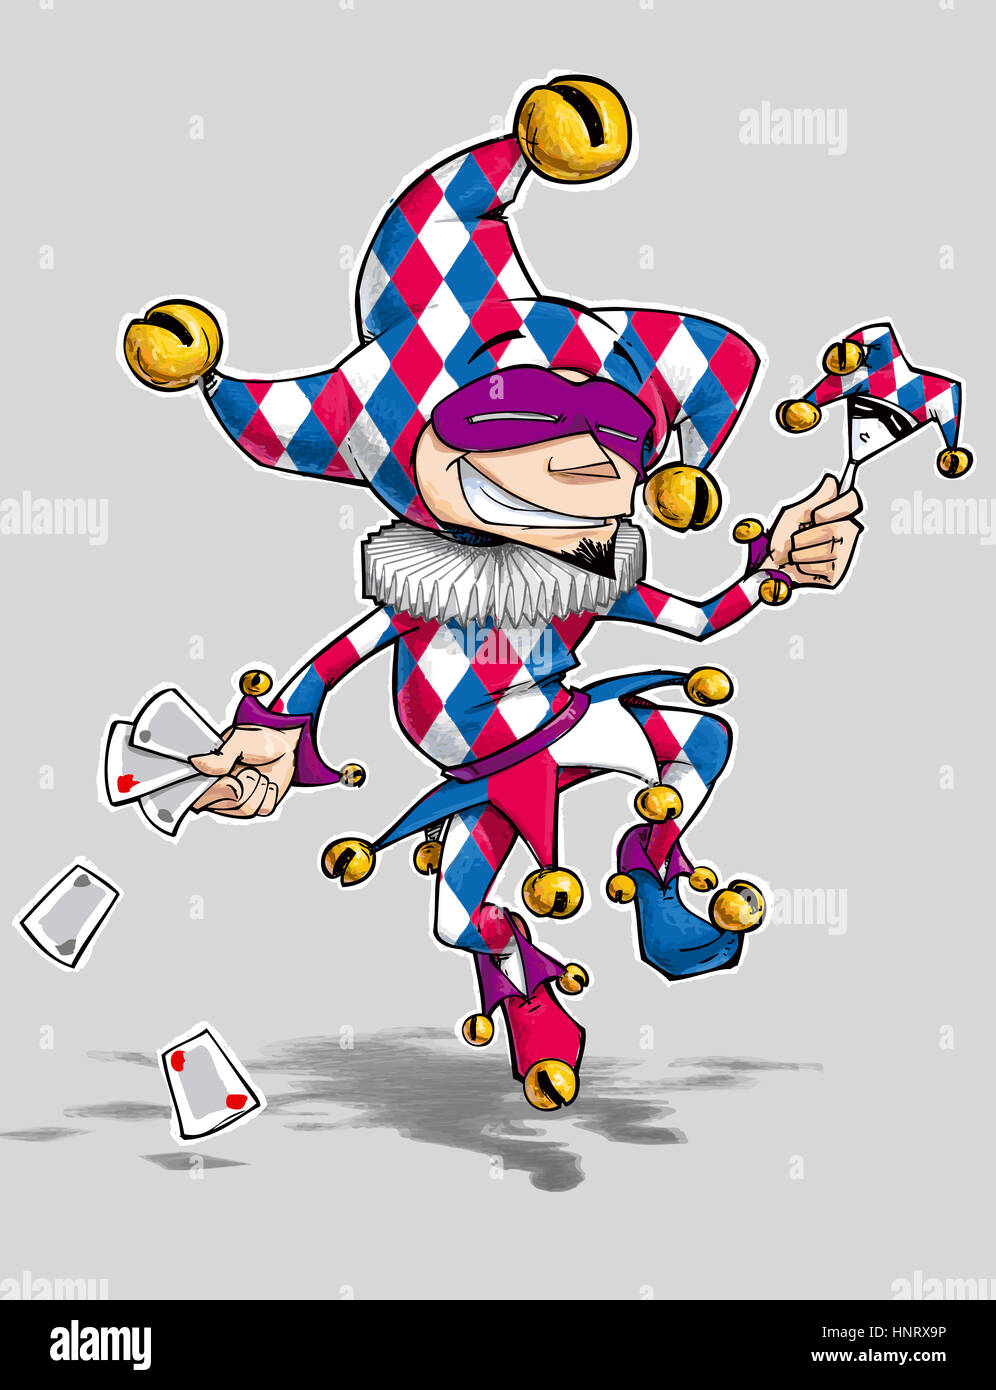 Cartoon illustration of a dancing jester in blue, red and white diamond outfit.  Enjoy!!! Stock Photo